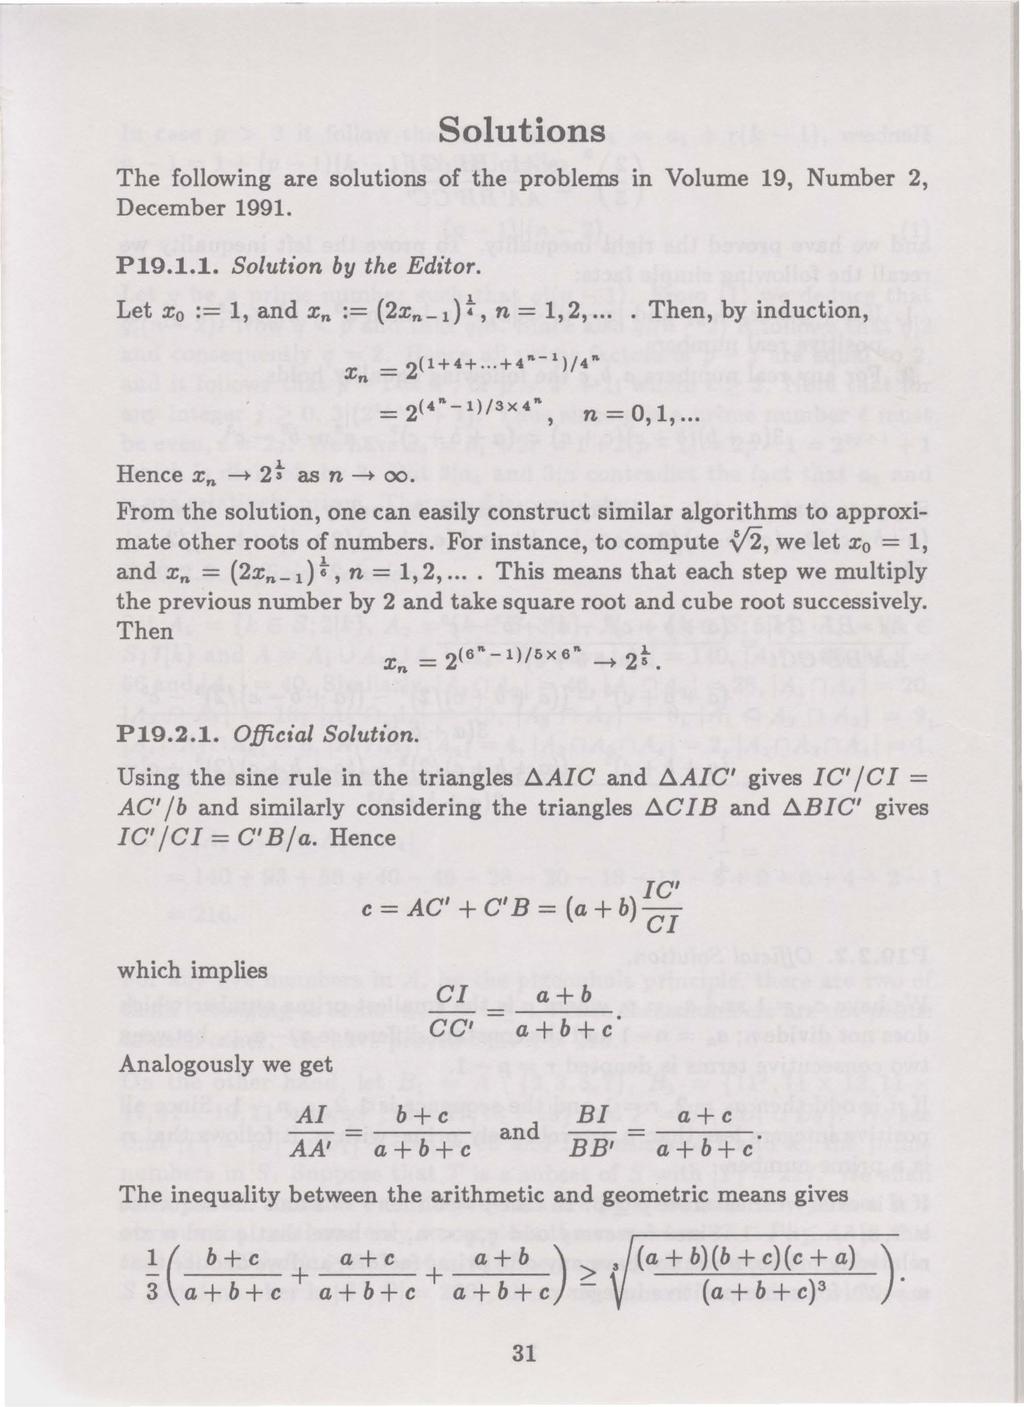 Solutions The following are solutions of the problems in Volume 19, Number 2, December 1991. P19.1.1. Solution by the Editor. Let x 0 := 1, and Xn := (2xn- t) t, n = 1, 2,... Then, by induction, 1.